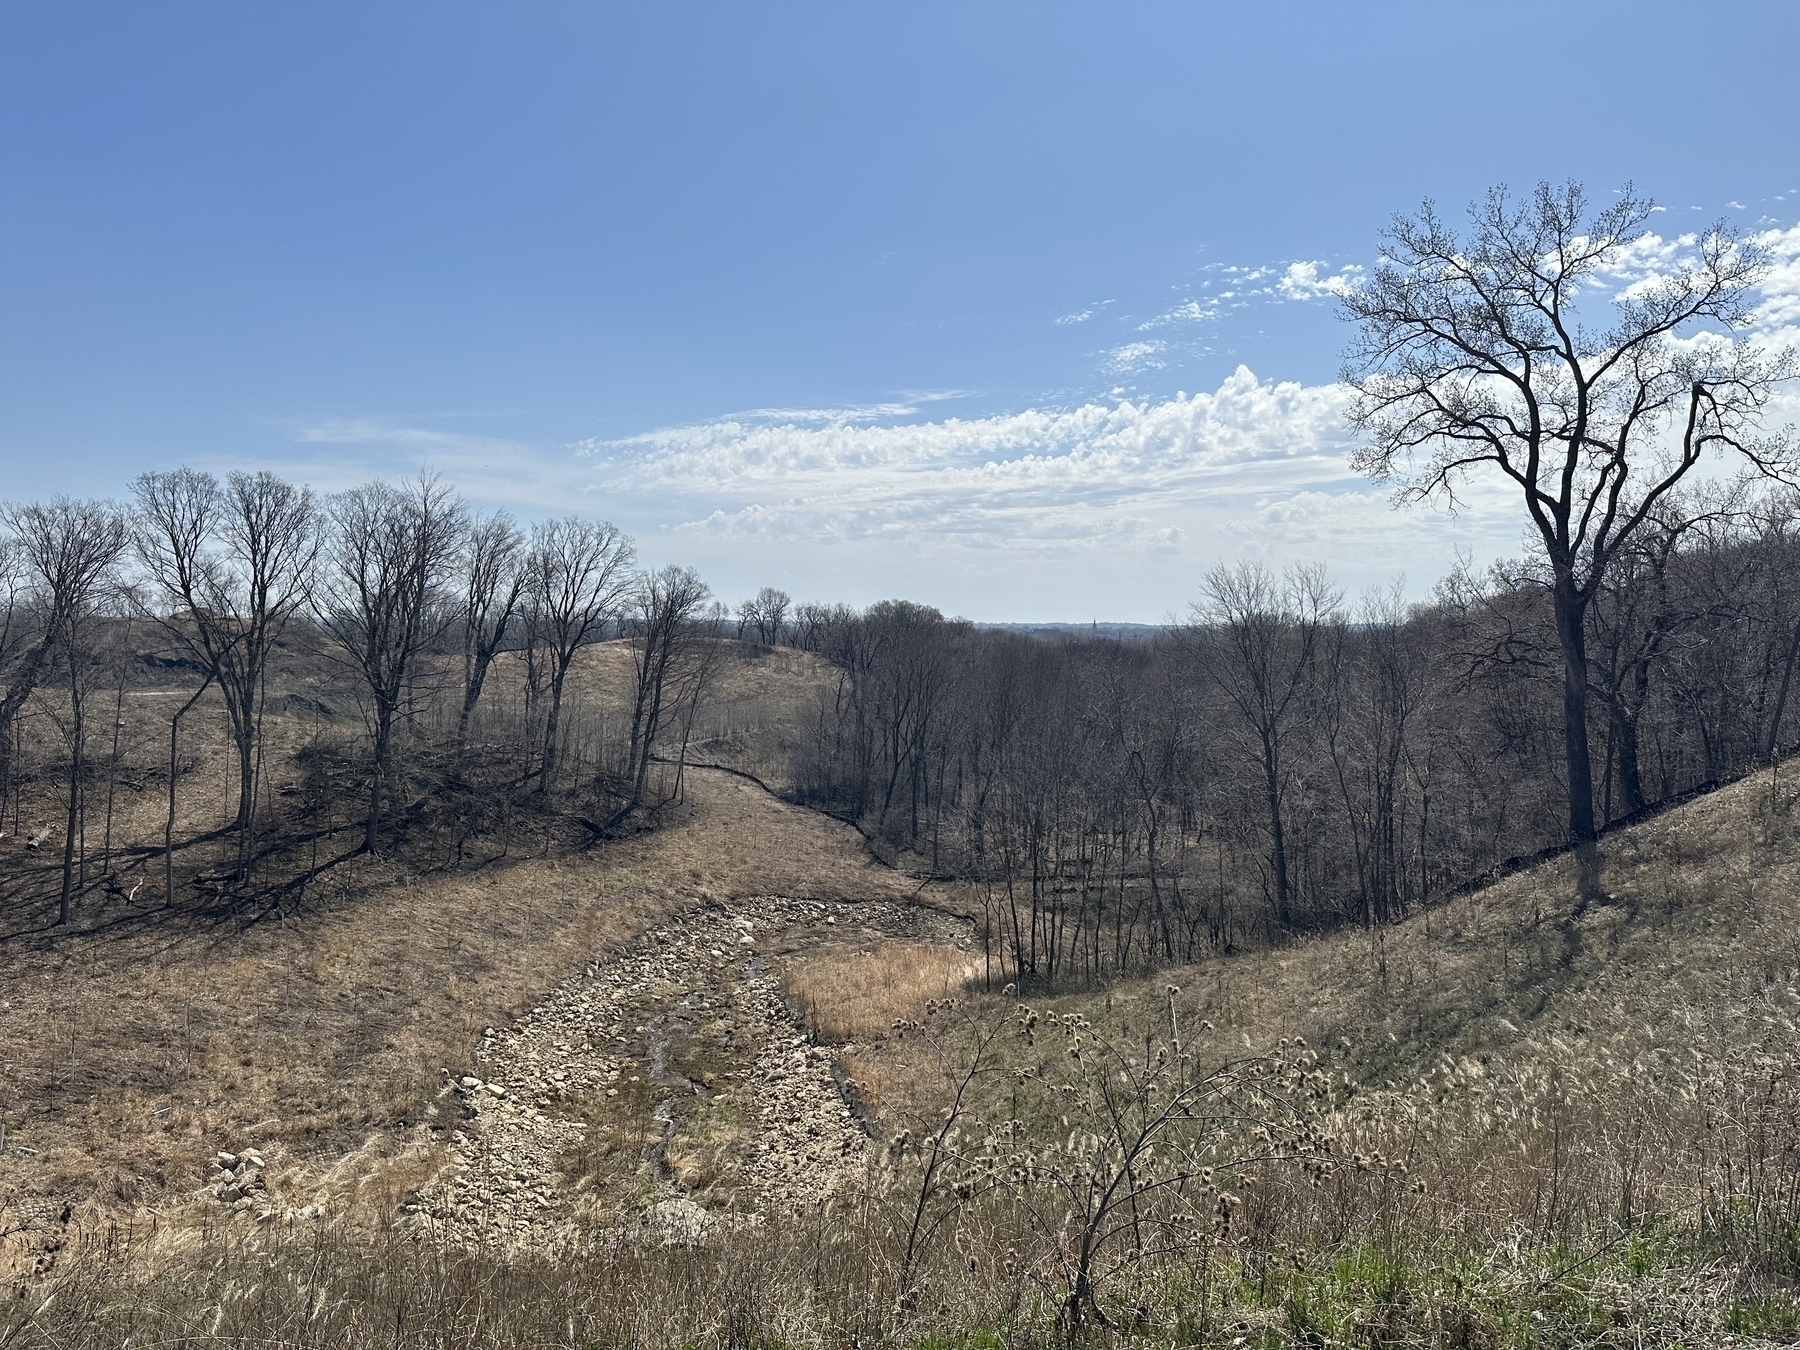 A barren hilly landscape with leafless trees leading down to the river bottoms under a partly cloudy sky.